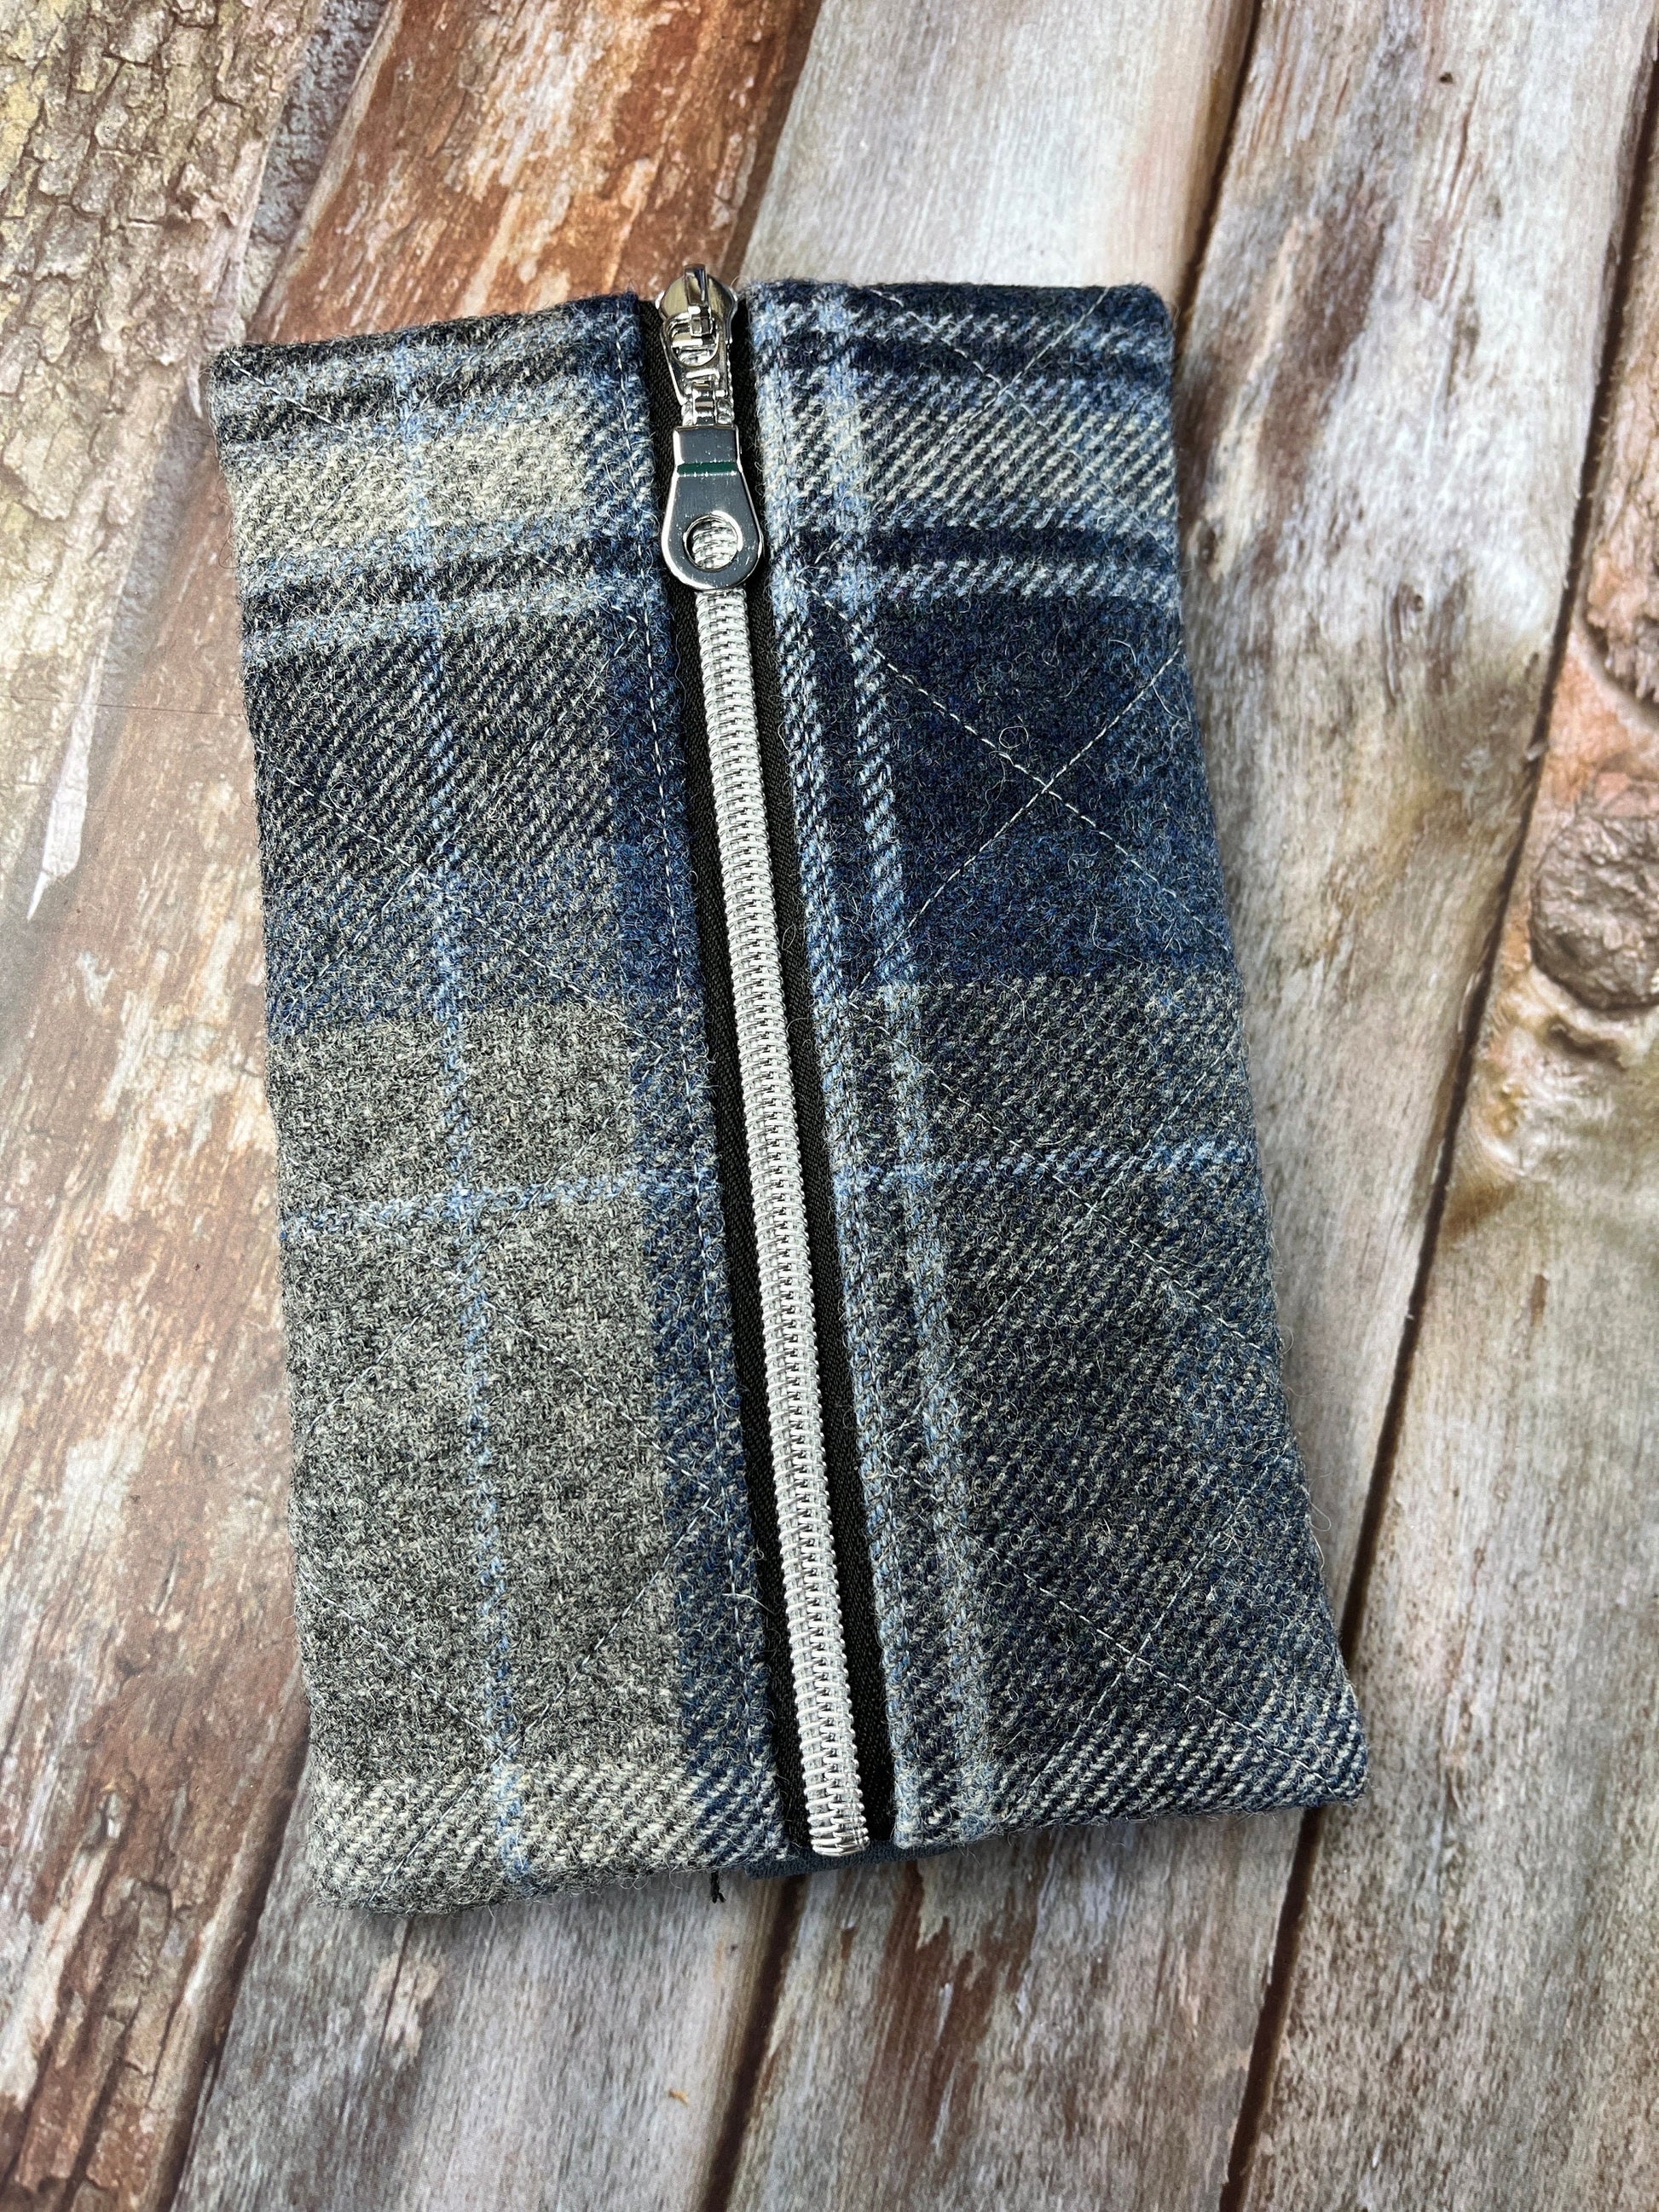 Stormy Seas Shetland Tweed Notebook Pencil Case - Uphouse Crafts